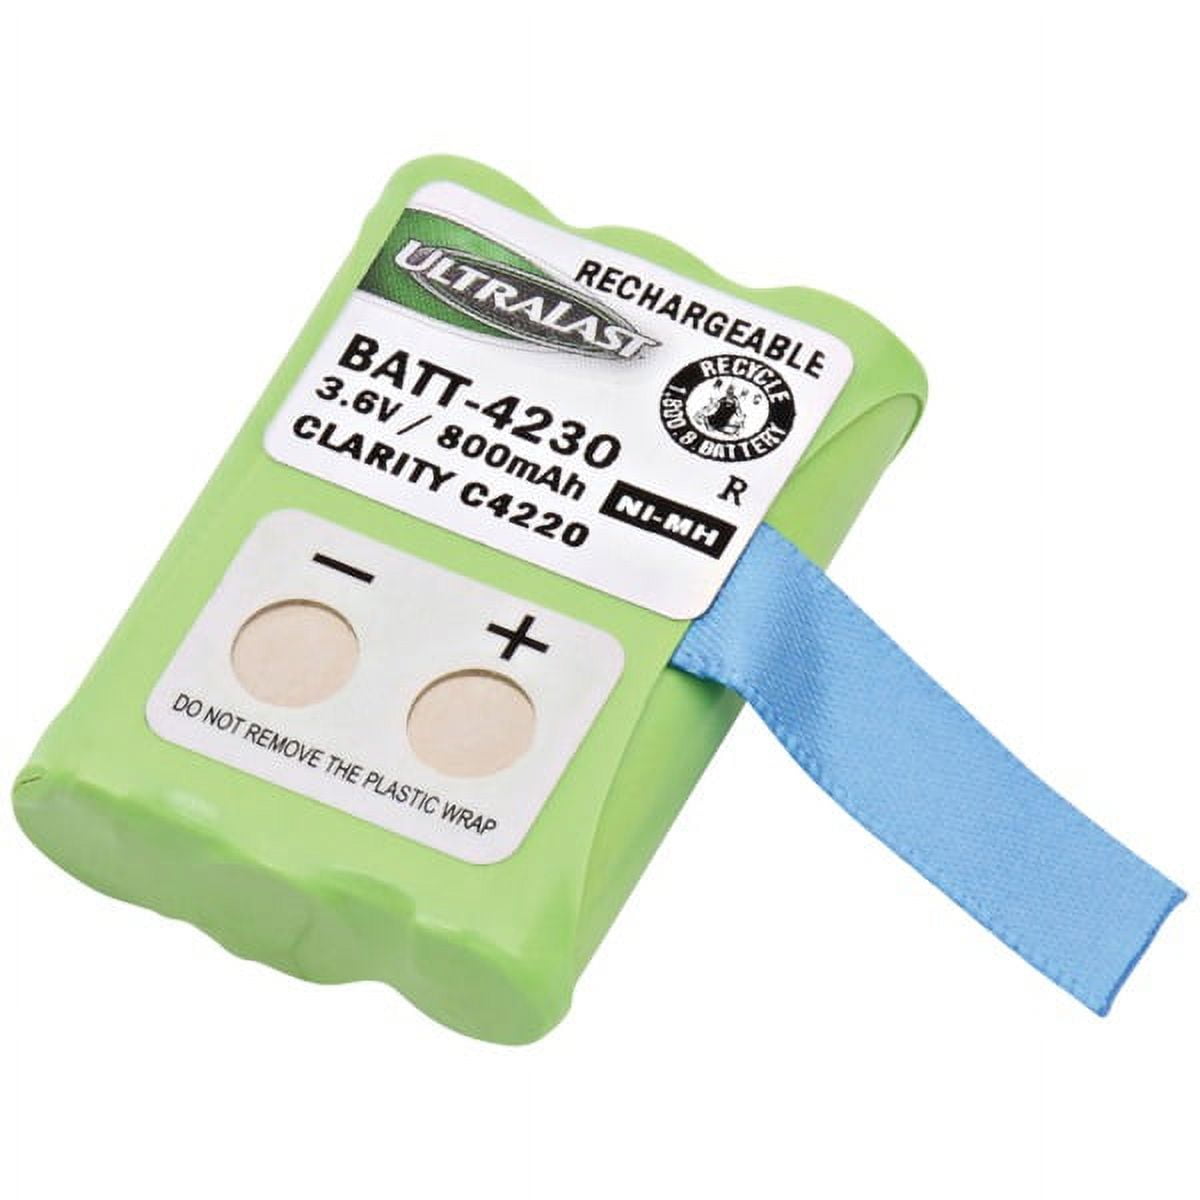 Picture of Ultralast BATT-4230 3.6V & 800 mAh Replacement Nickel Metal Hydride Battery fits forClarity - C4220 Cordless Phone